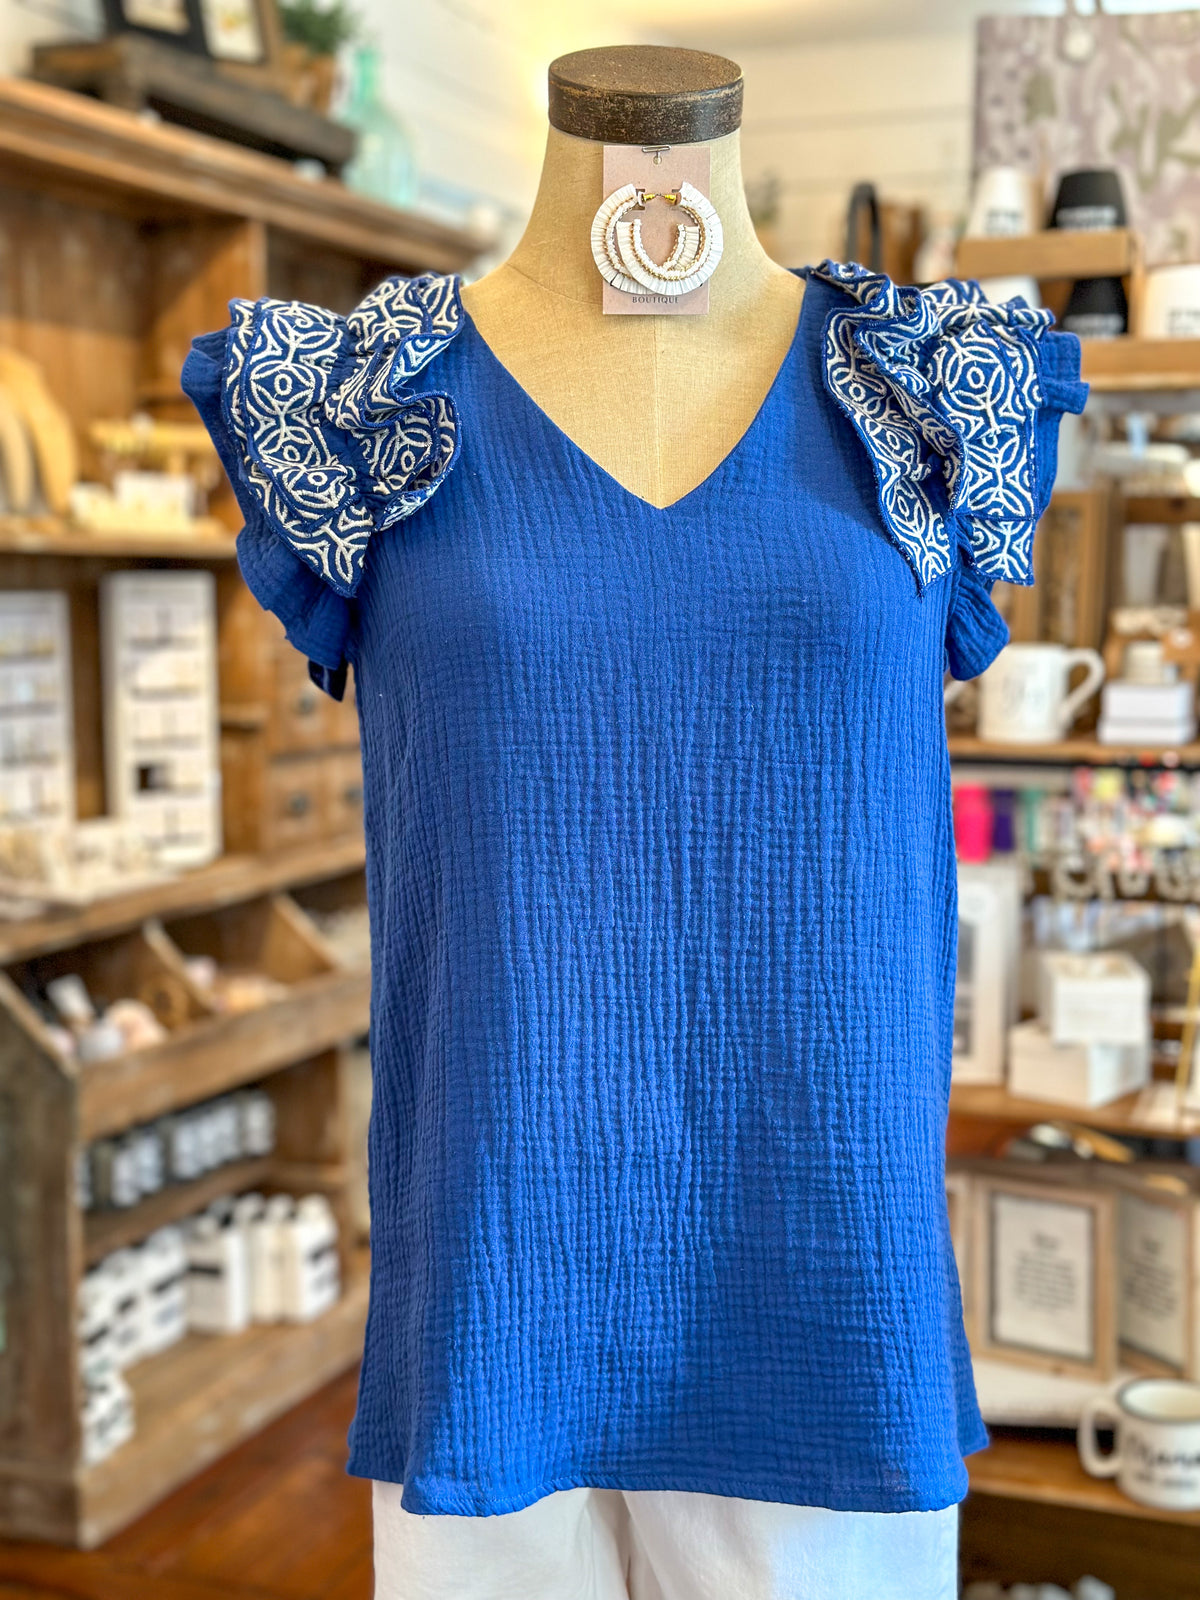 blue washco top with white embroidery ruffle sleeves  washco